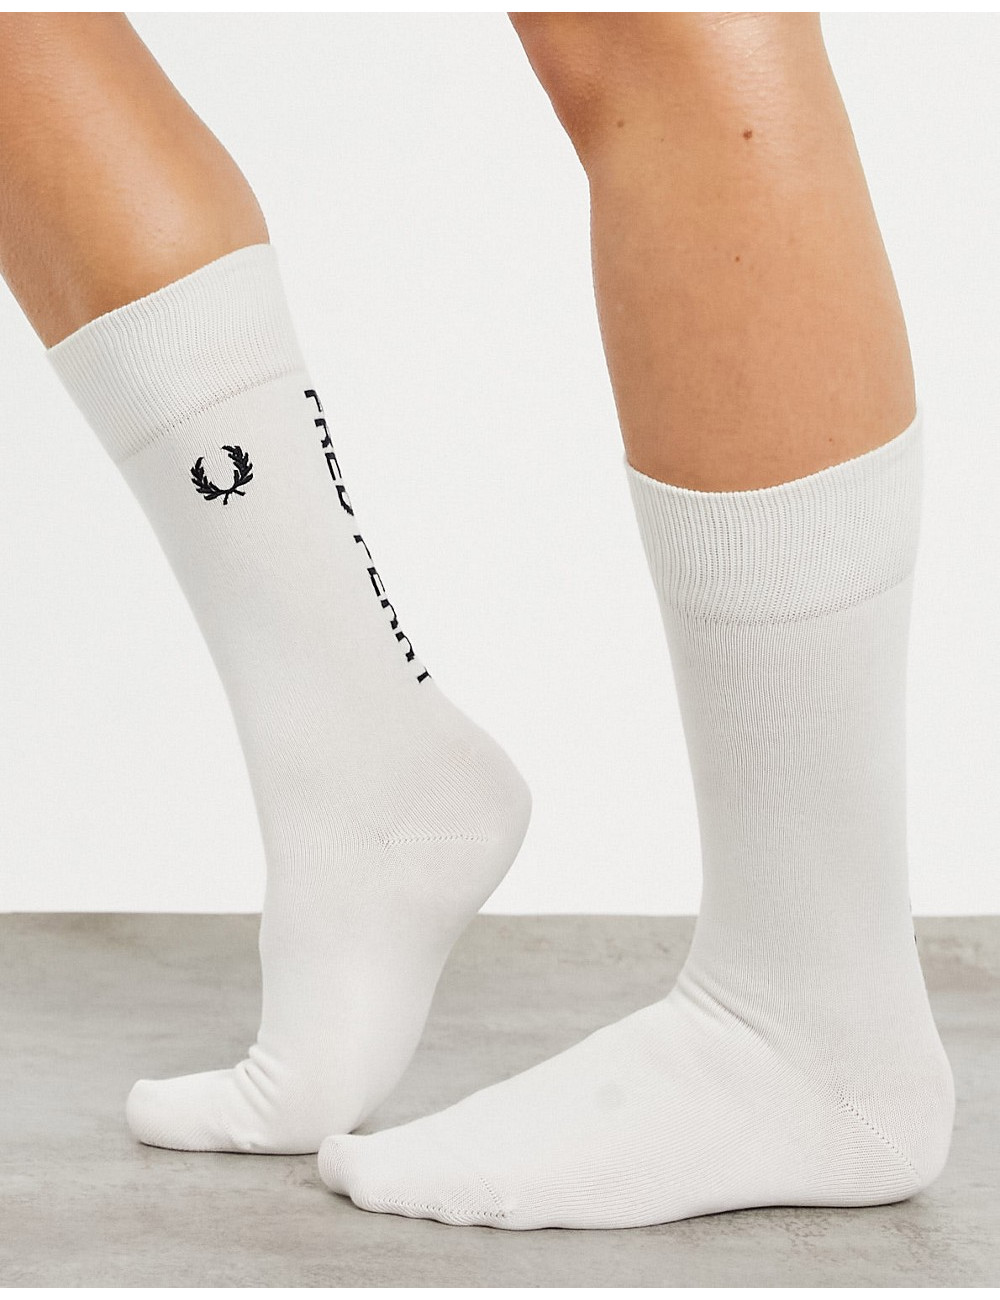 Fred Perry logo socks in white